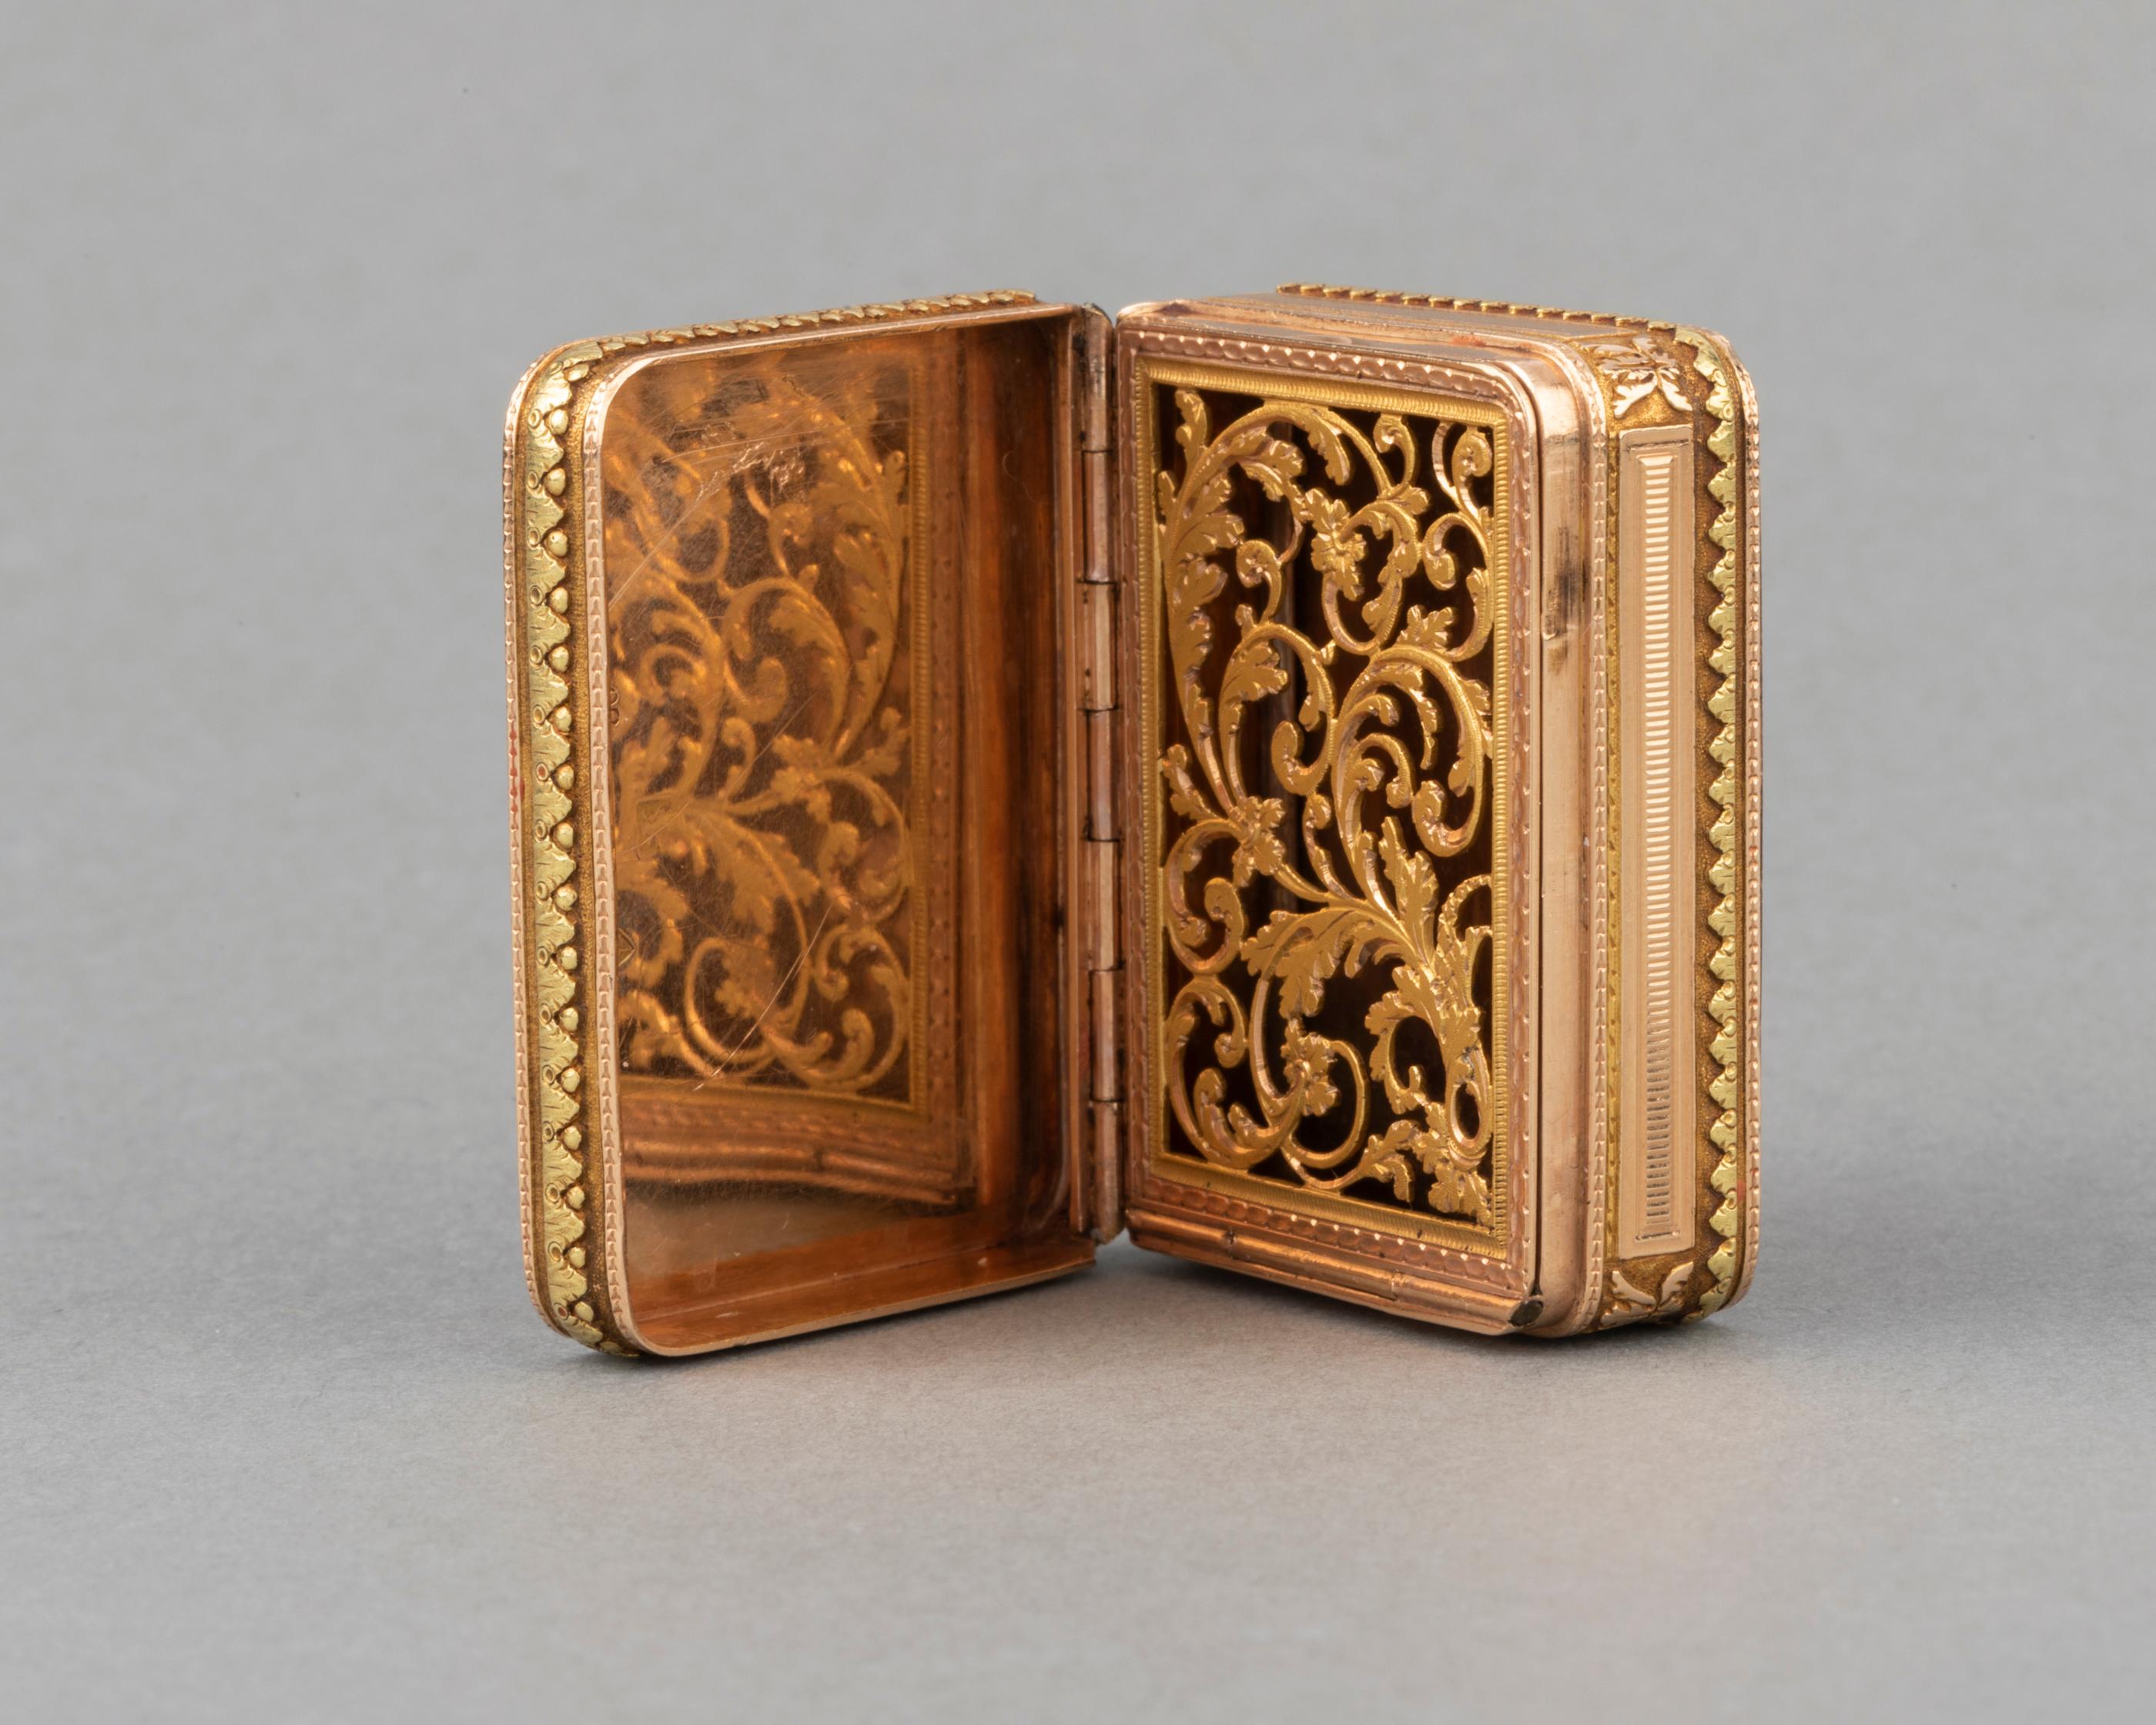 Very beautiful antique perfume boxe.
Made in France in early 19th Century.
dimensions: 38*25*14 mm
Multiple colors of gold 18k. 
Total weight: 28.70 grams.